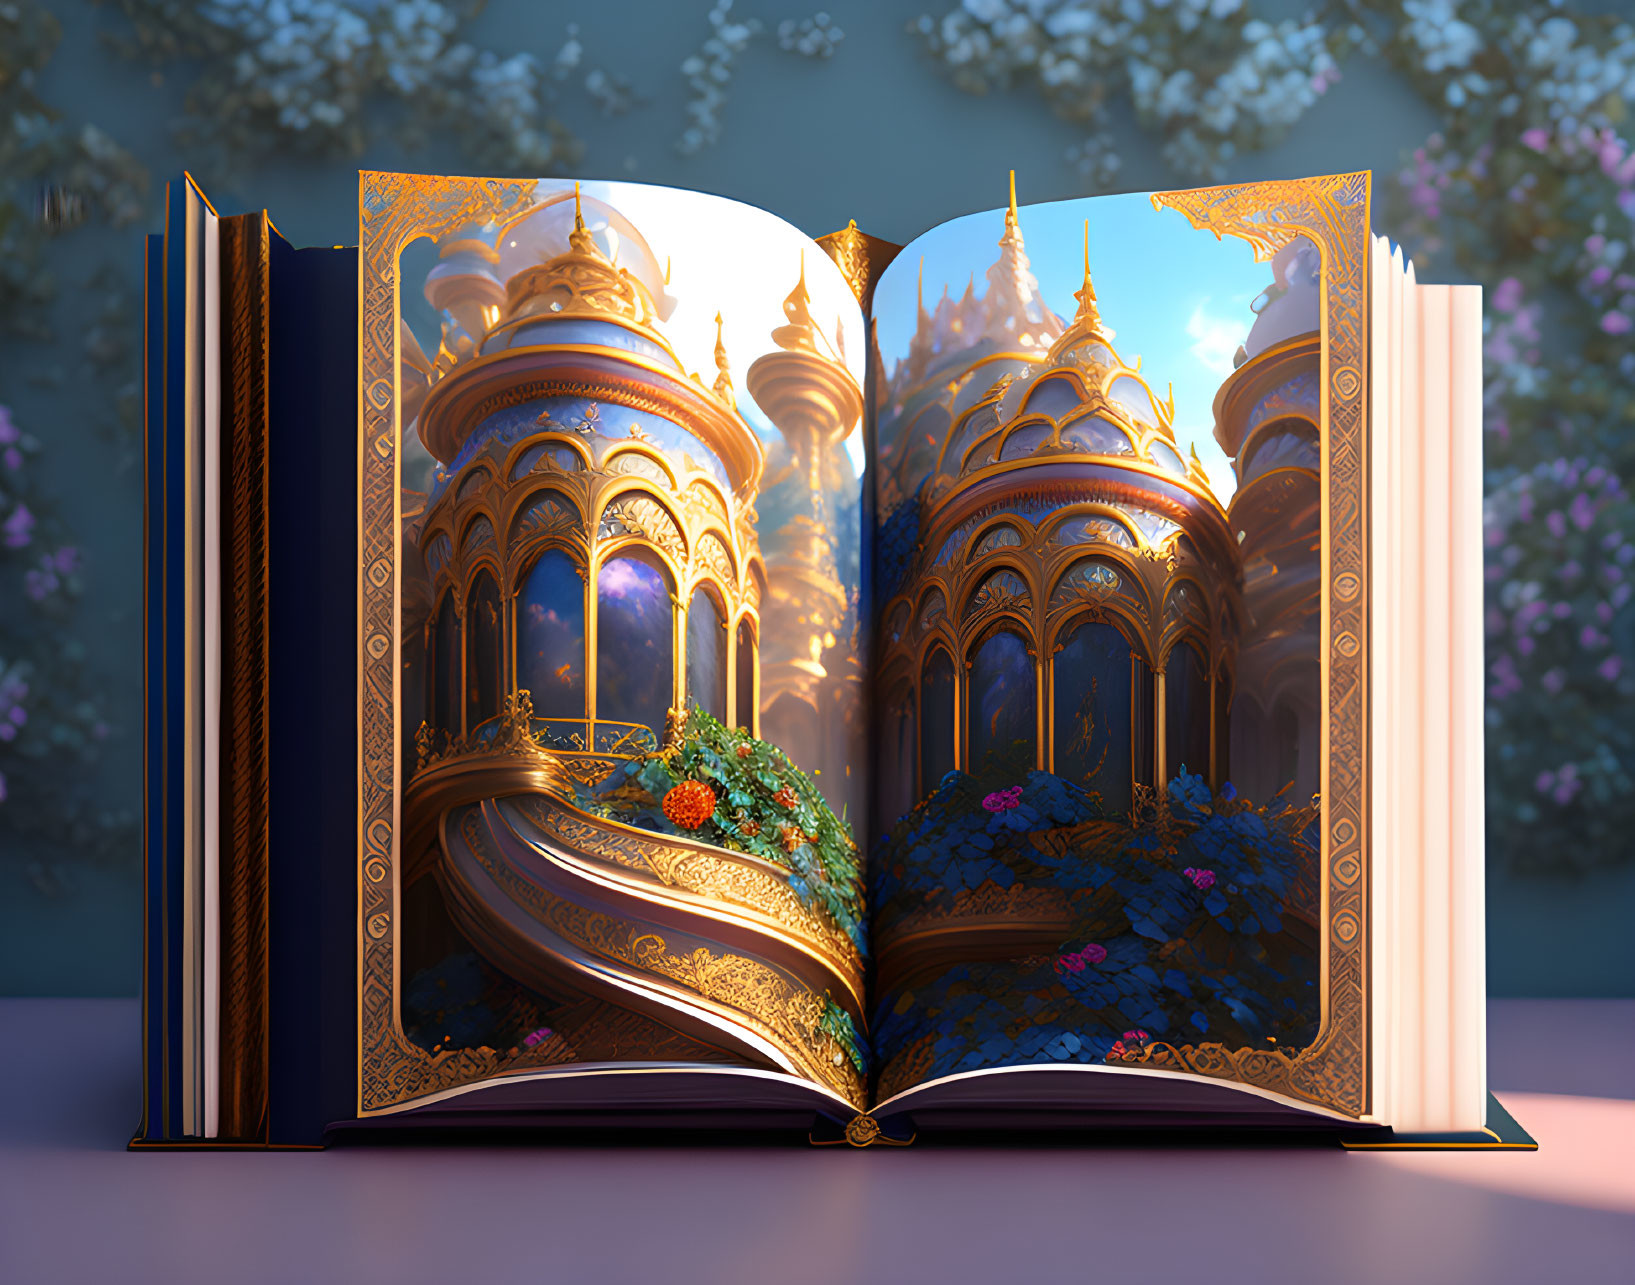 Intricate golden-edged open book reveals palace illusion at twilight